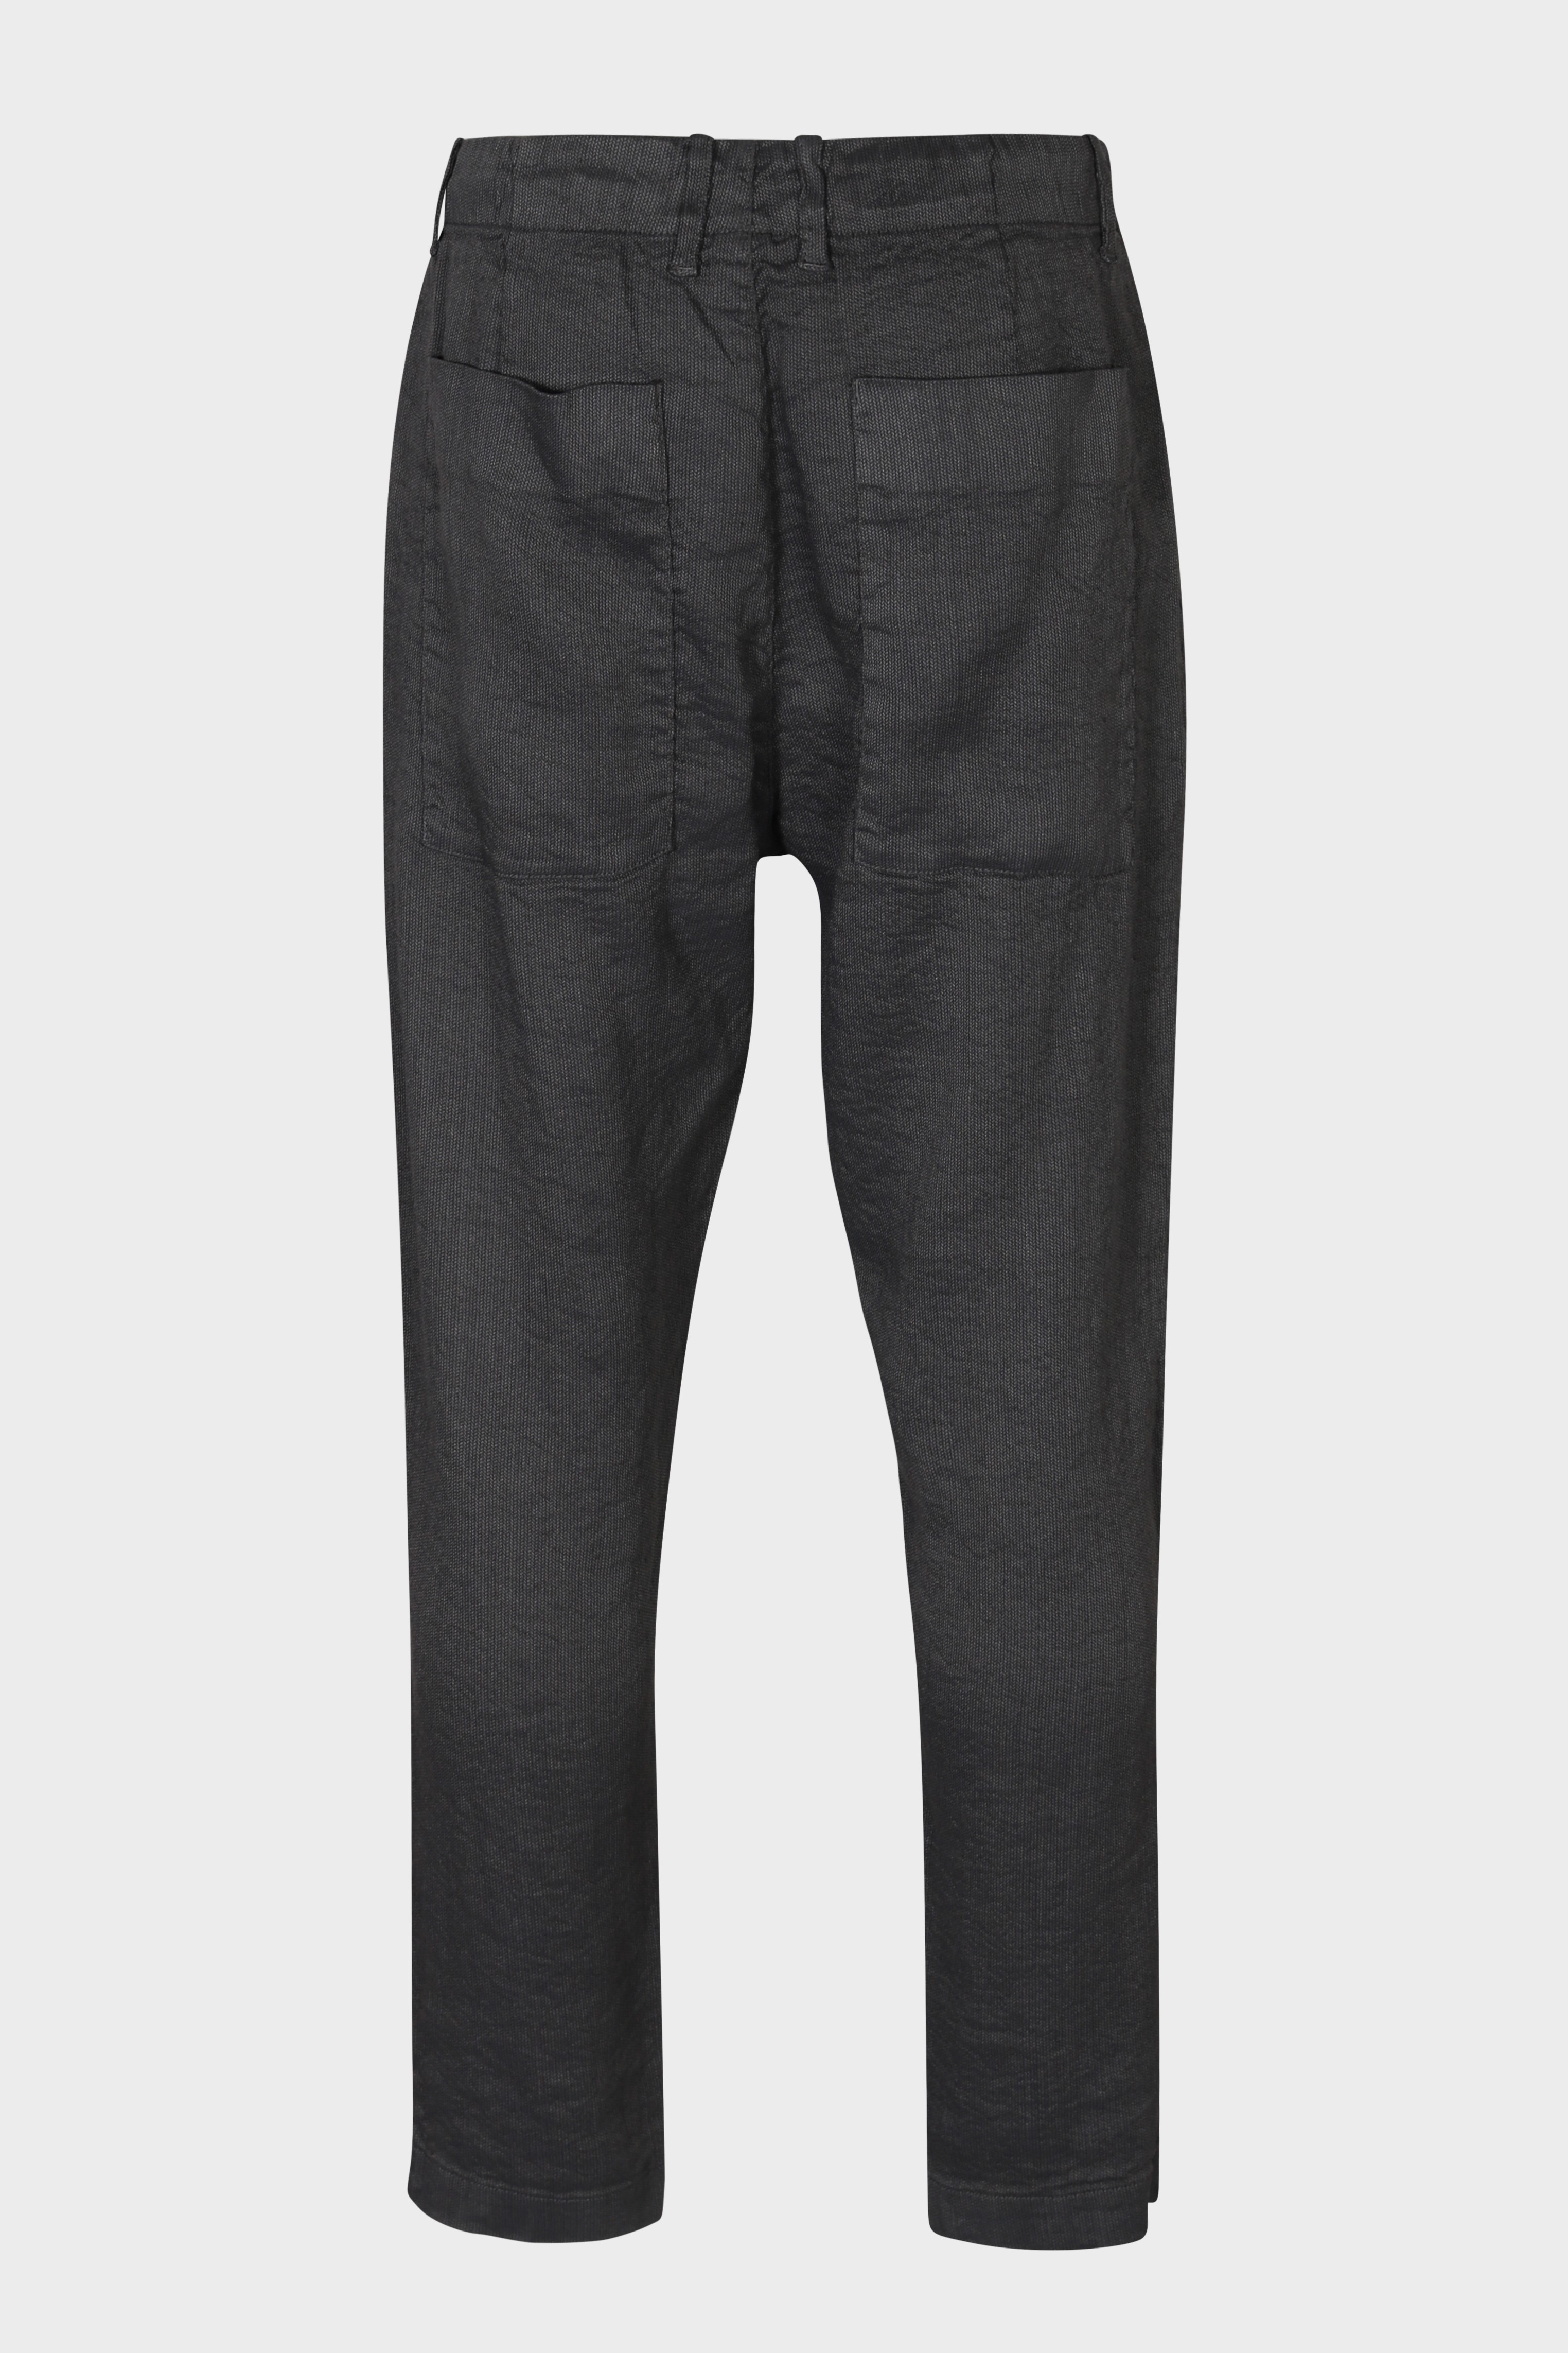 TRANSIT UOMO Structure Stretch Pant in Charcoal XL